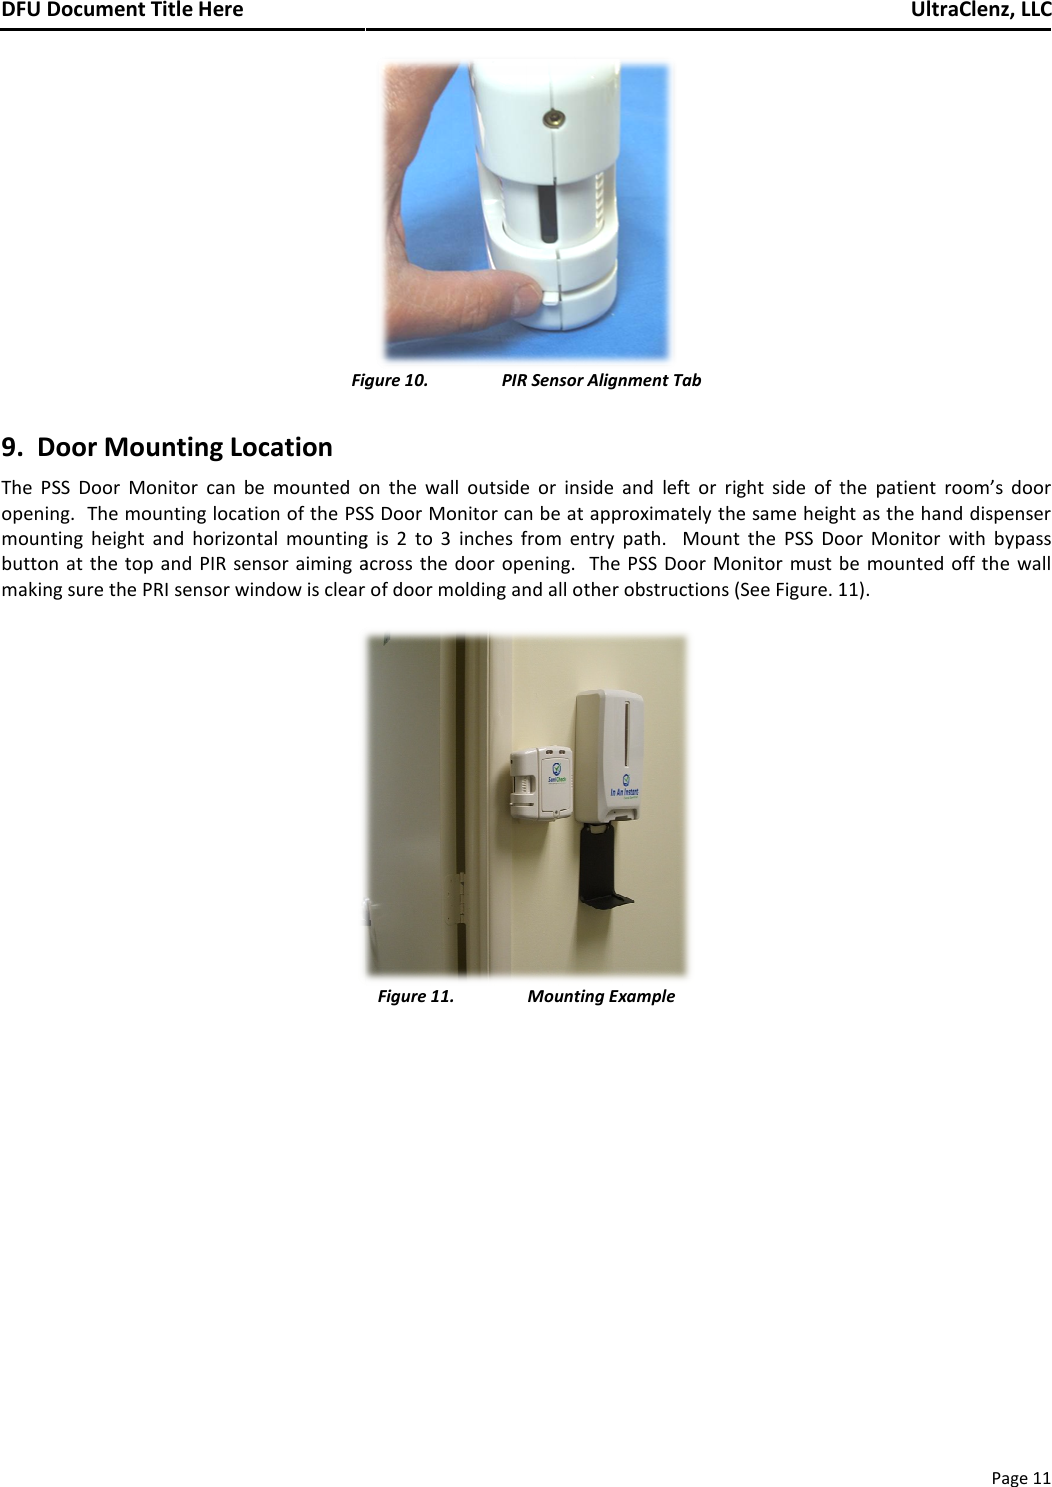 DFU Document Title Here    Figu9.  Door Mounting Location The  PSS  Door  Monitor can  be  mounted  onopening.  The mounting location of the PSS mounting  height  and  horizontal  mounting button at the  top and  PIR sensor aiming acmaking sure the PRI sensor window is clear o    Figure 10. PIR Sensor Alignment Tab   on  the  wall  outside  or  inside  and left  or  right  side  of  thPSS Door Monitor can be at approximately the same heighting  is  2  to  3  inches  from  entry  path.    Mount  the PSS  Doog across the door  opening.    The  PSS Door  Monitor must bear of door molding and all other obstructions (See Figure. 11 Figure 11. Mounting Example    UltraClenz, LLCPage 11 f  the patient  room’s  door ight as the hand dispenser Door  Monitor  with  bypass st be  mounted off the wall e. 11). 